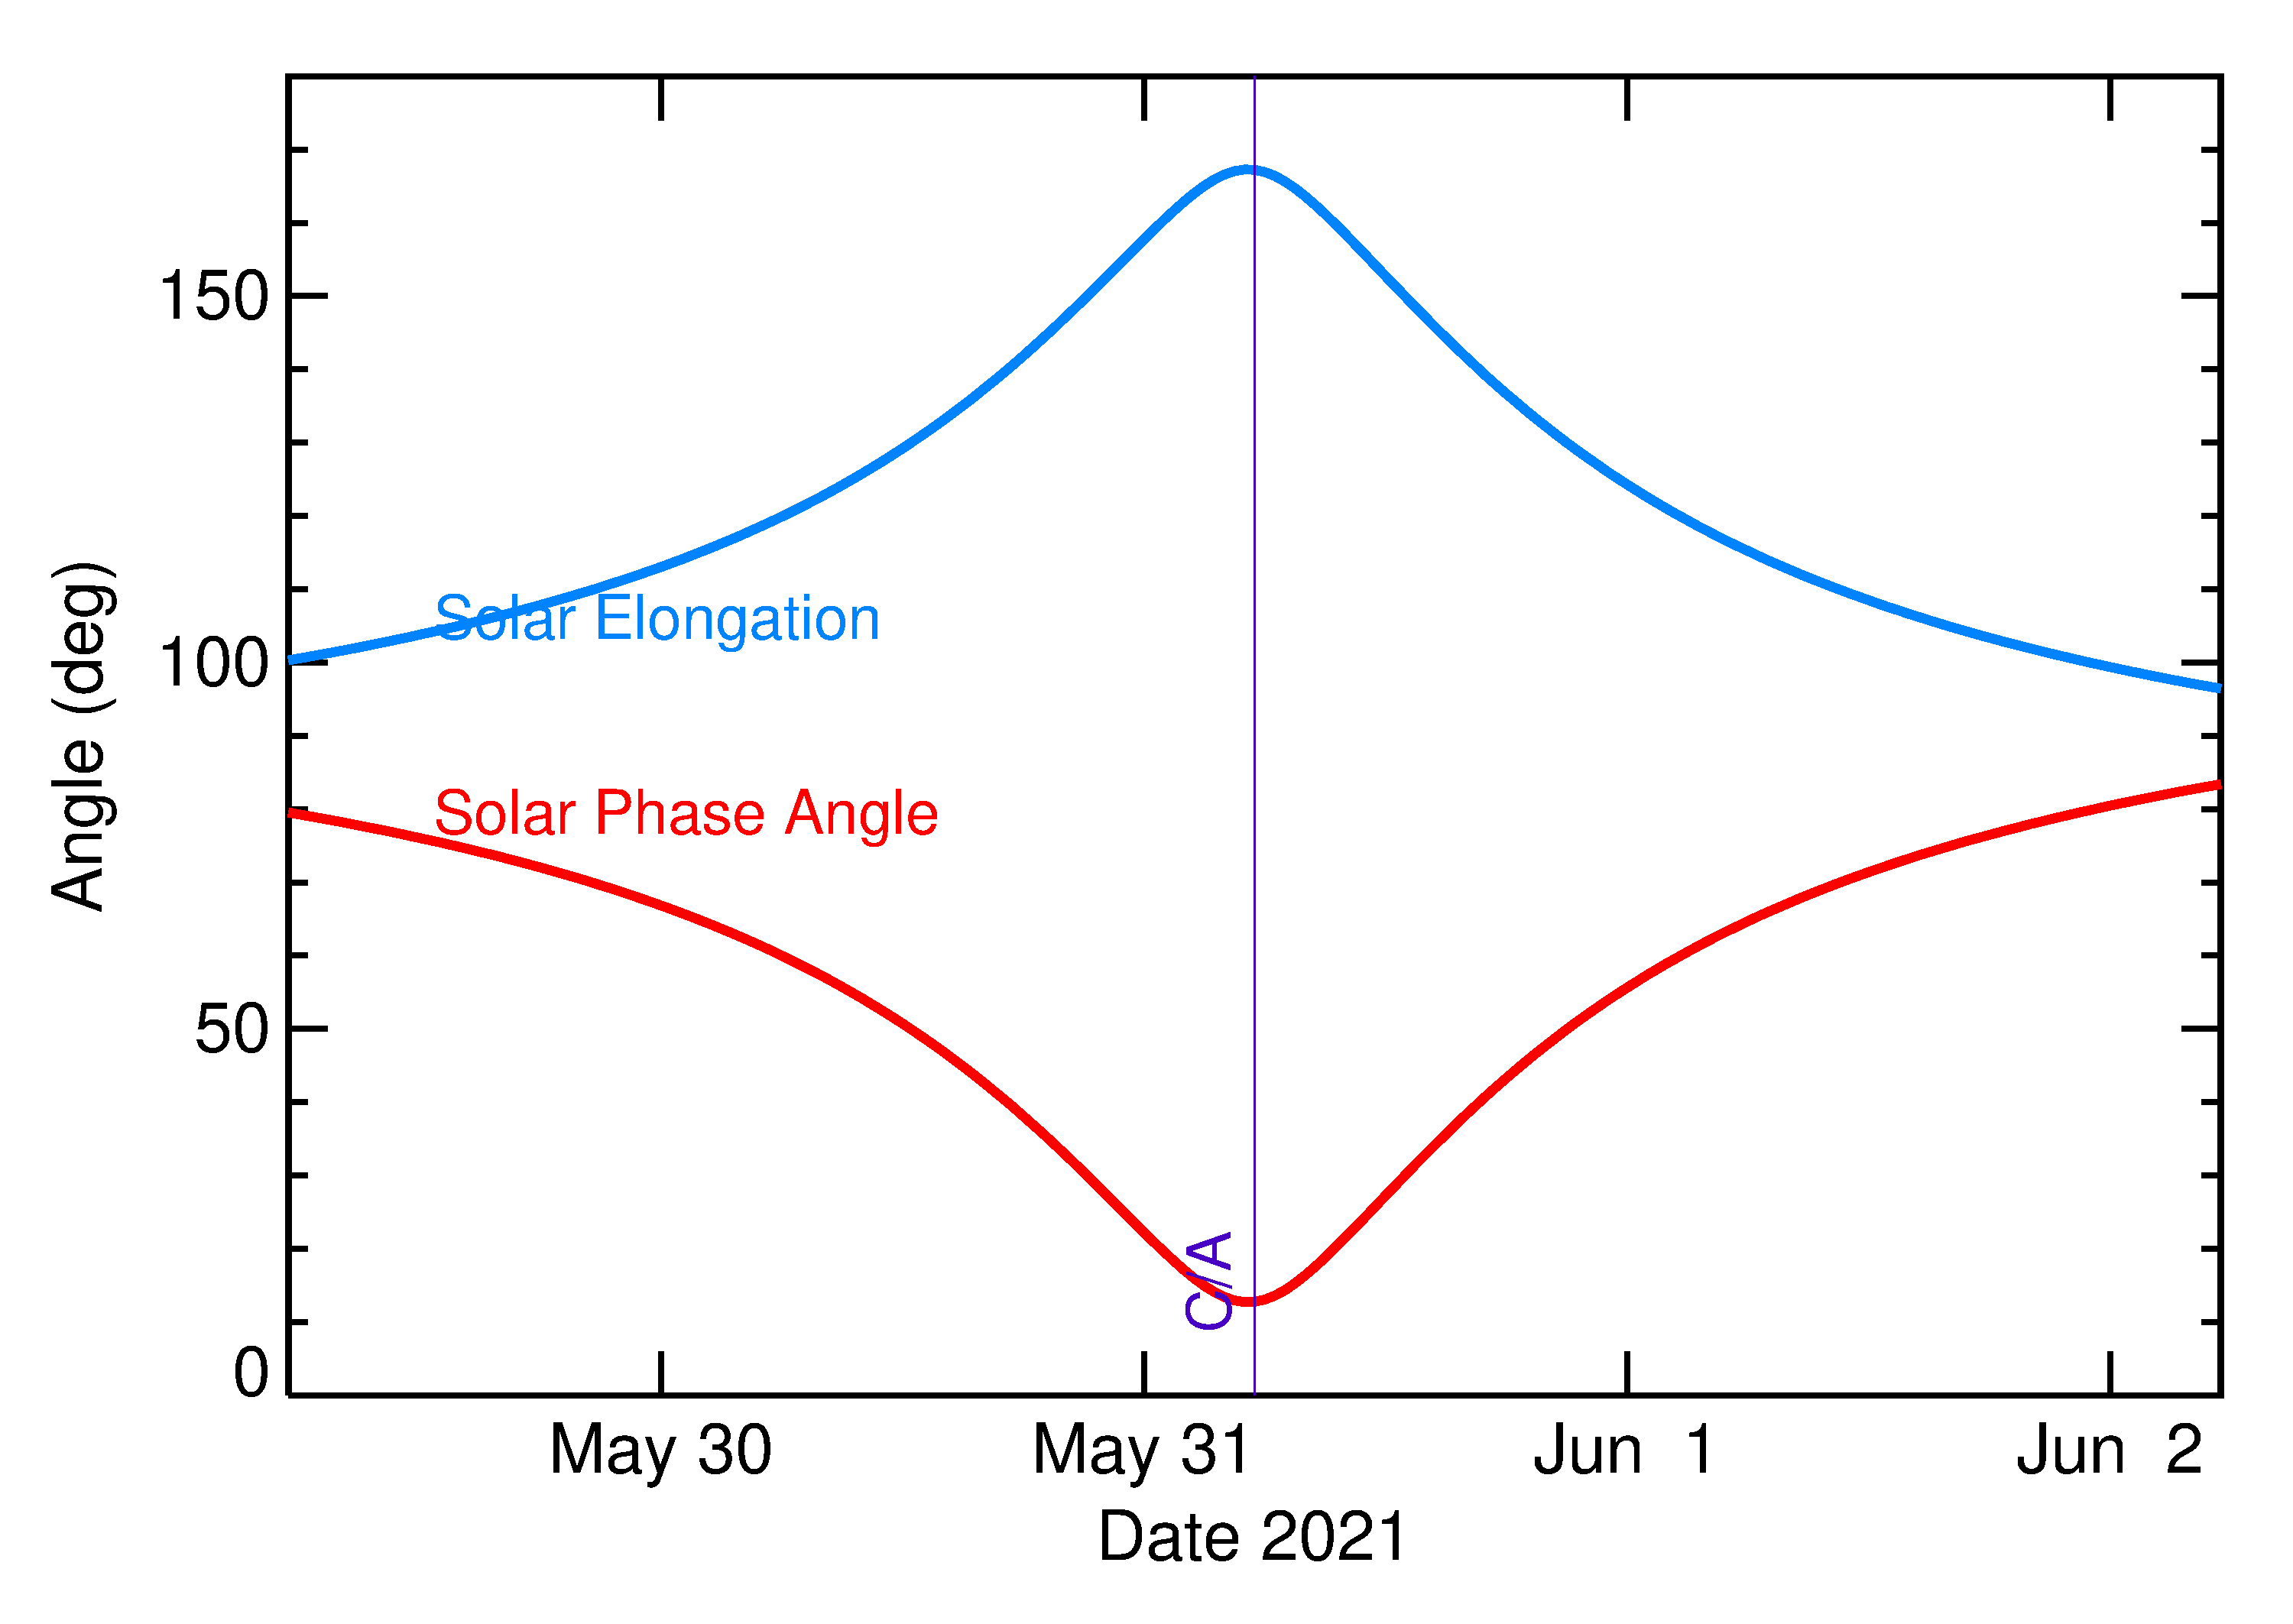 Solar Elongation and Solar Phase Angle of 2021 KQ2 in the days around closest approach